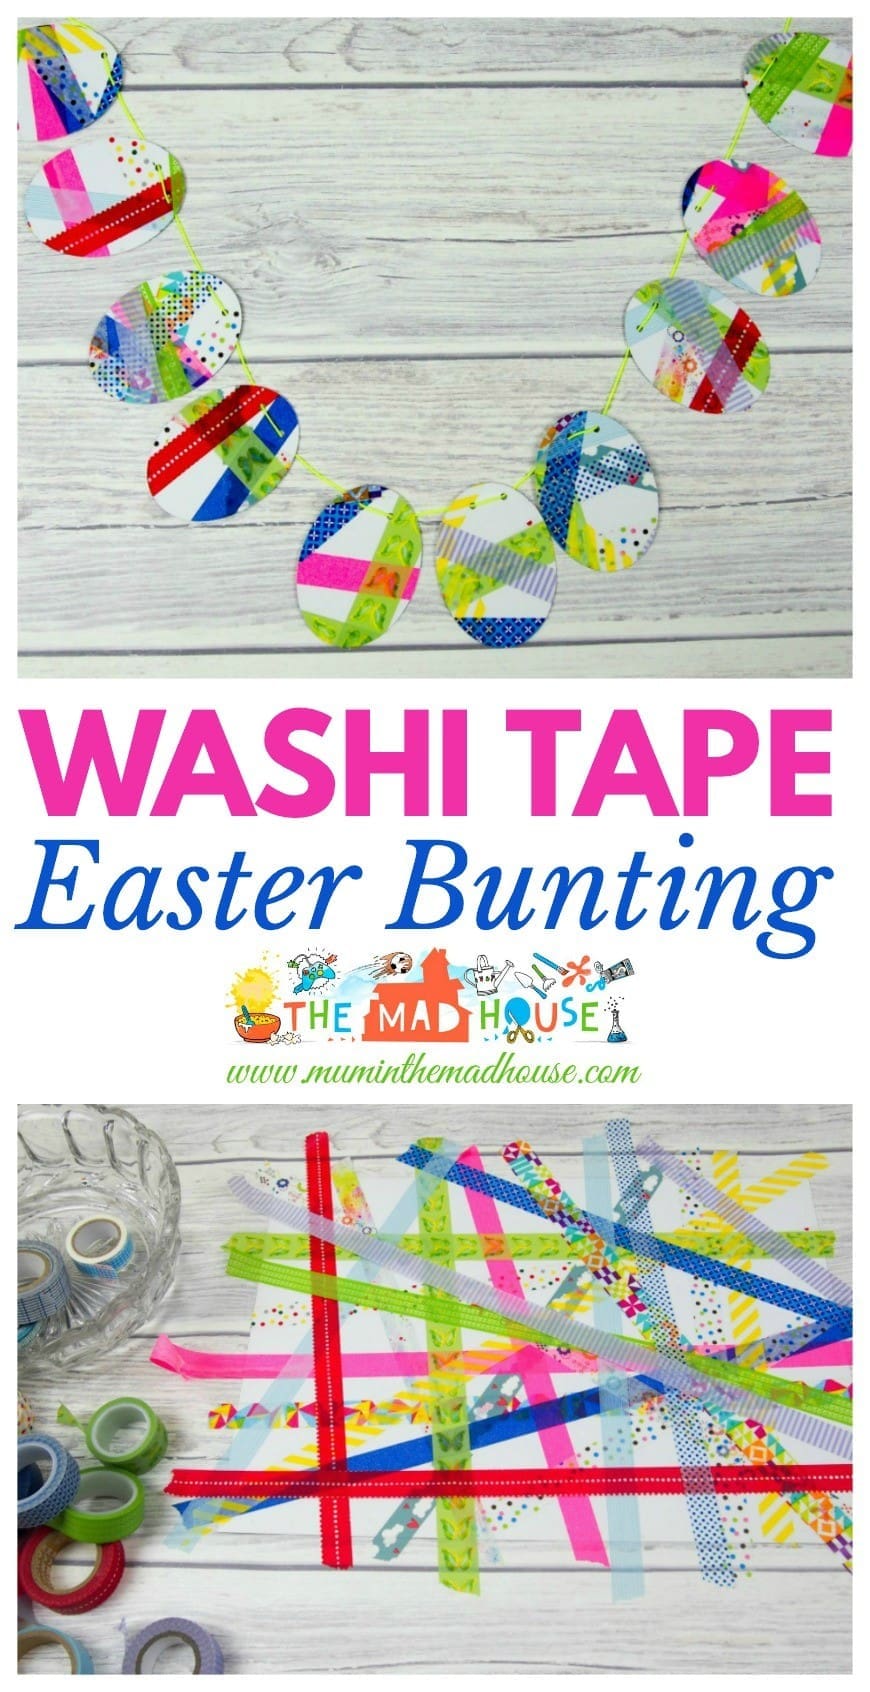 Washi Tape Easter Bunting.  This is a fab DIY craft that is perfect for kids to celebrate Easter and spring.  A simple children’s process art activity that makes a beautiful Easter Decoration.